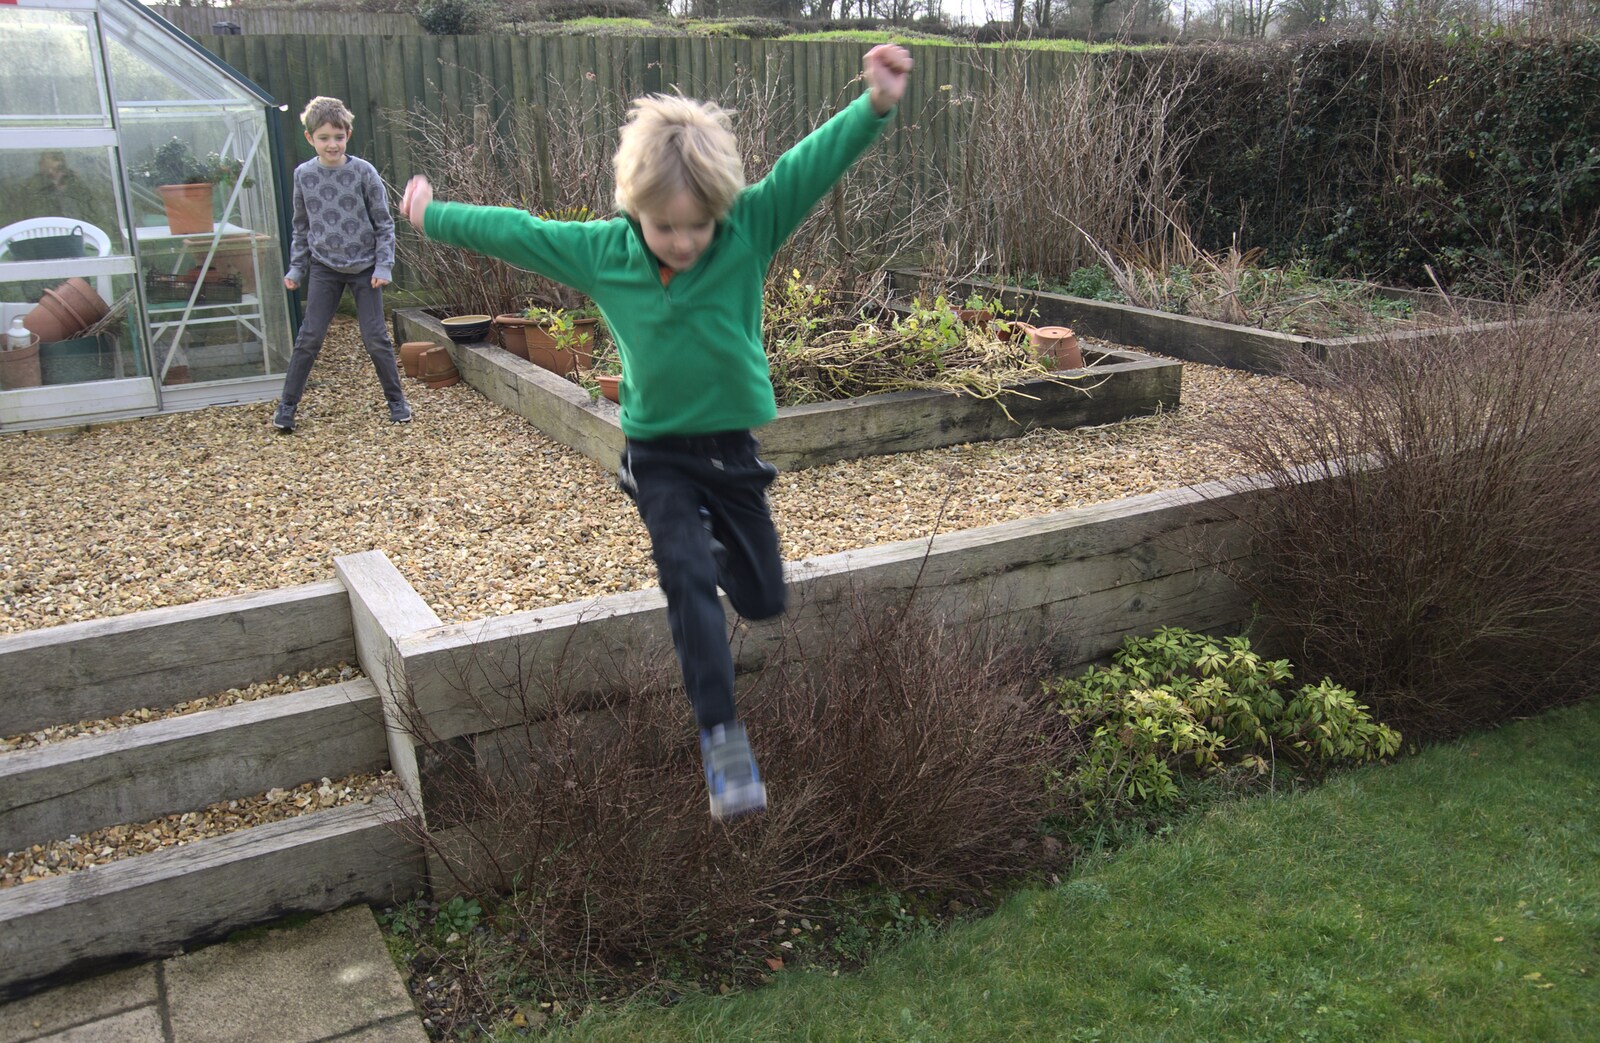 Harry jumps off the sleeper wall from An End-of-Year Trip to Spreyton, Devon - 29th December 2017